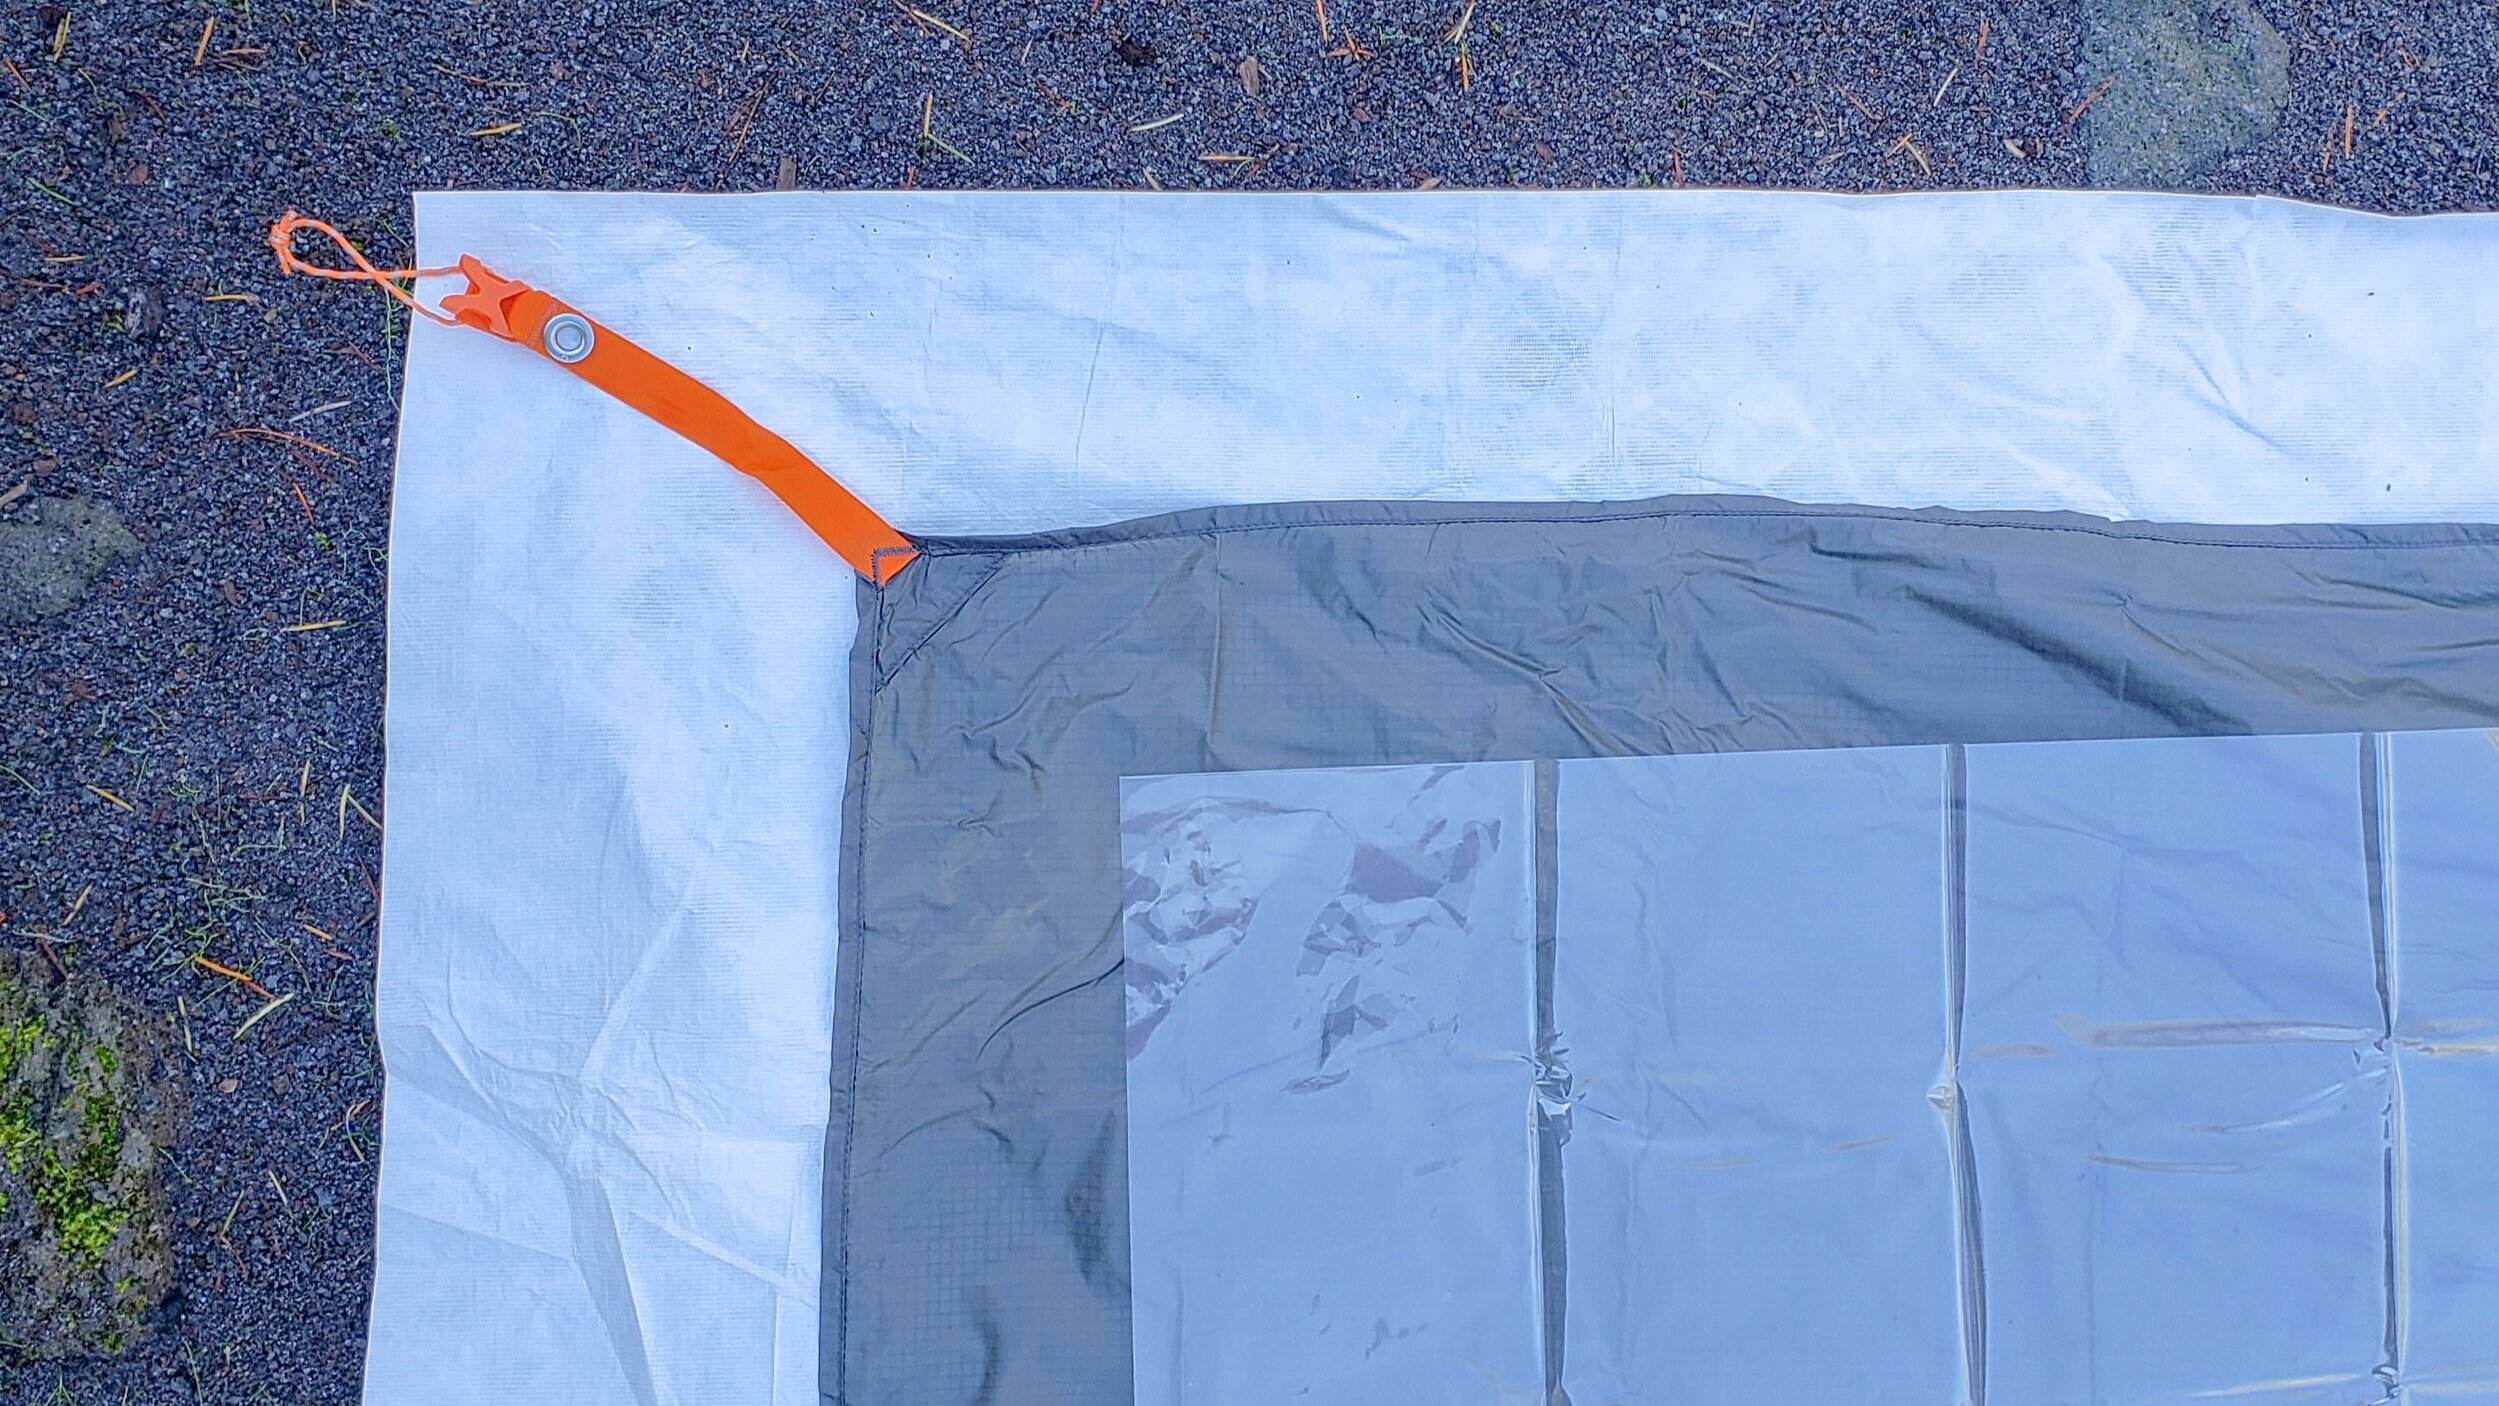 Bottom to top Layer: Left to right: Tyvek, tent footprint for copper spur, & Polycryo